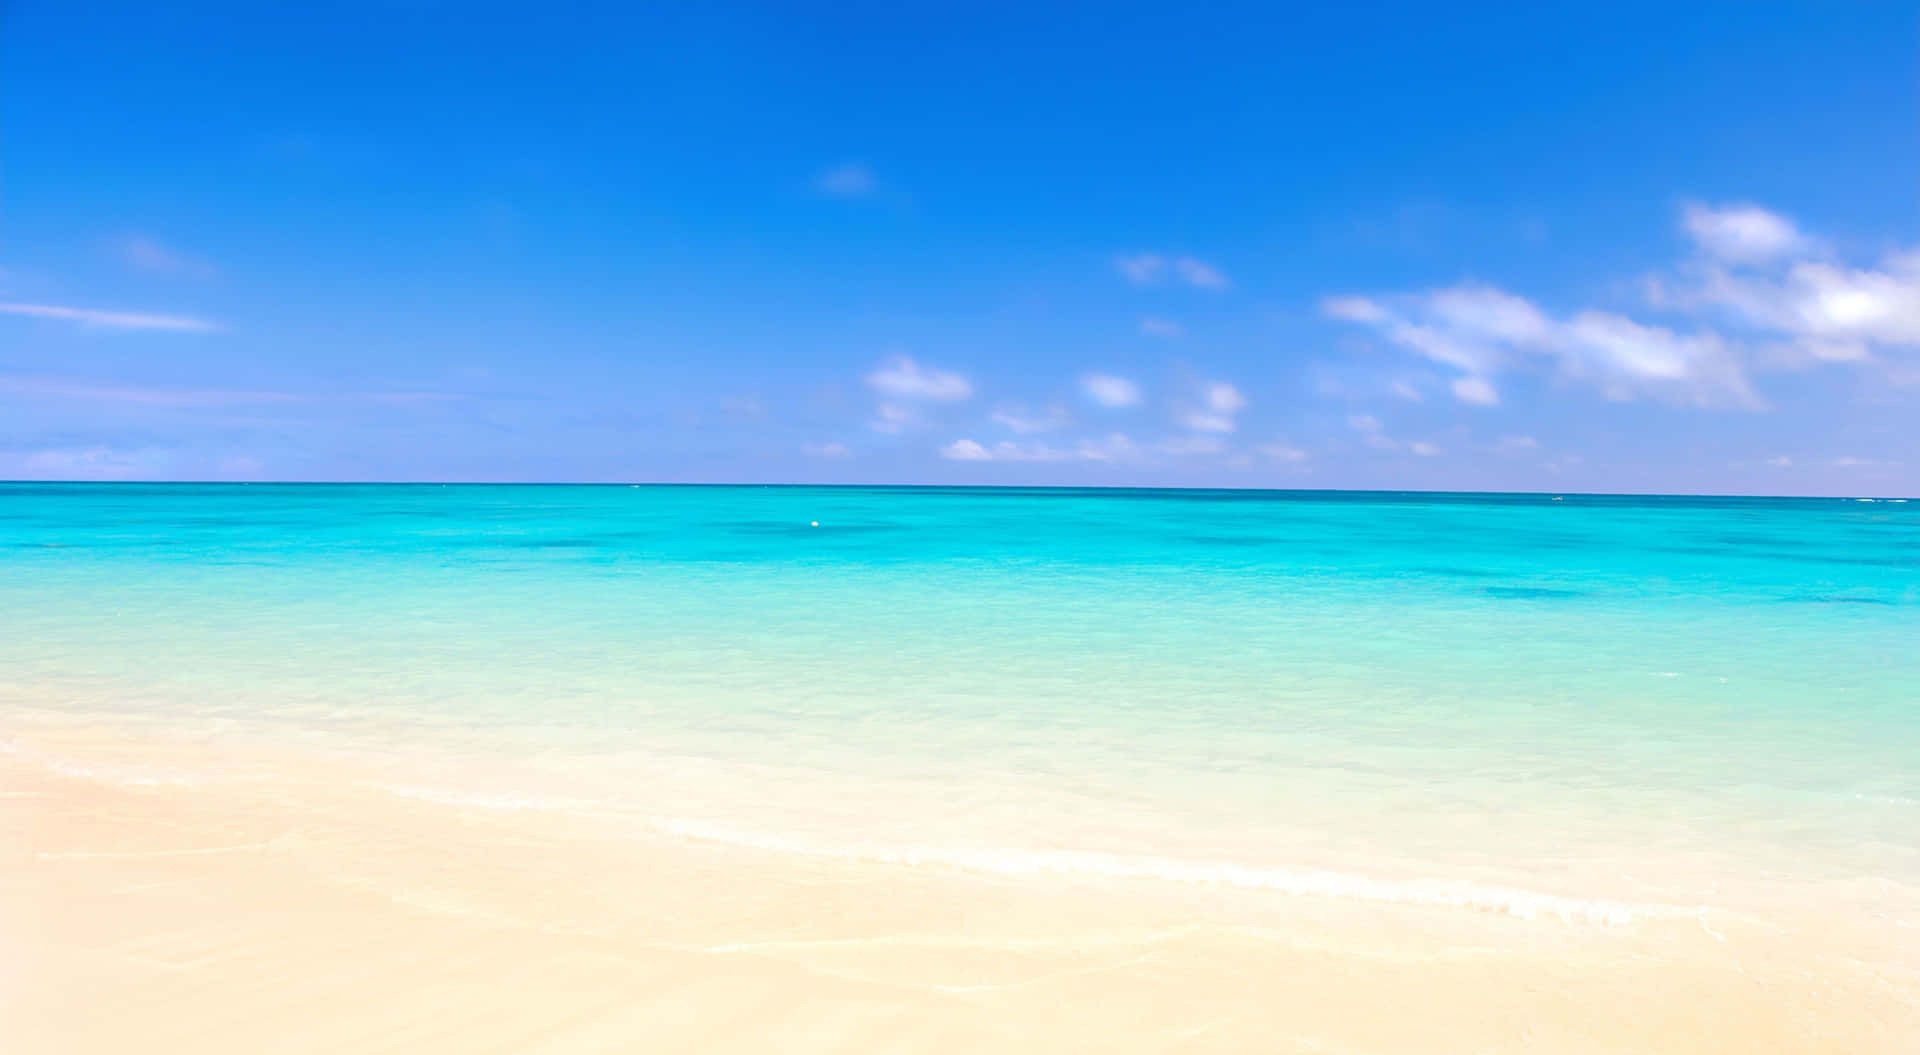 A Beach With Clear Blue Water And Sand